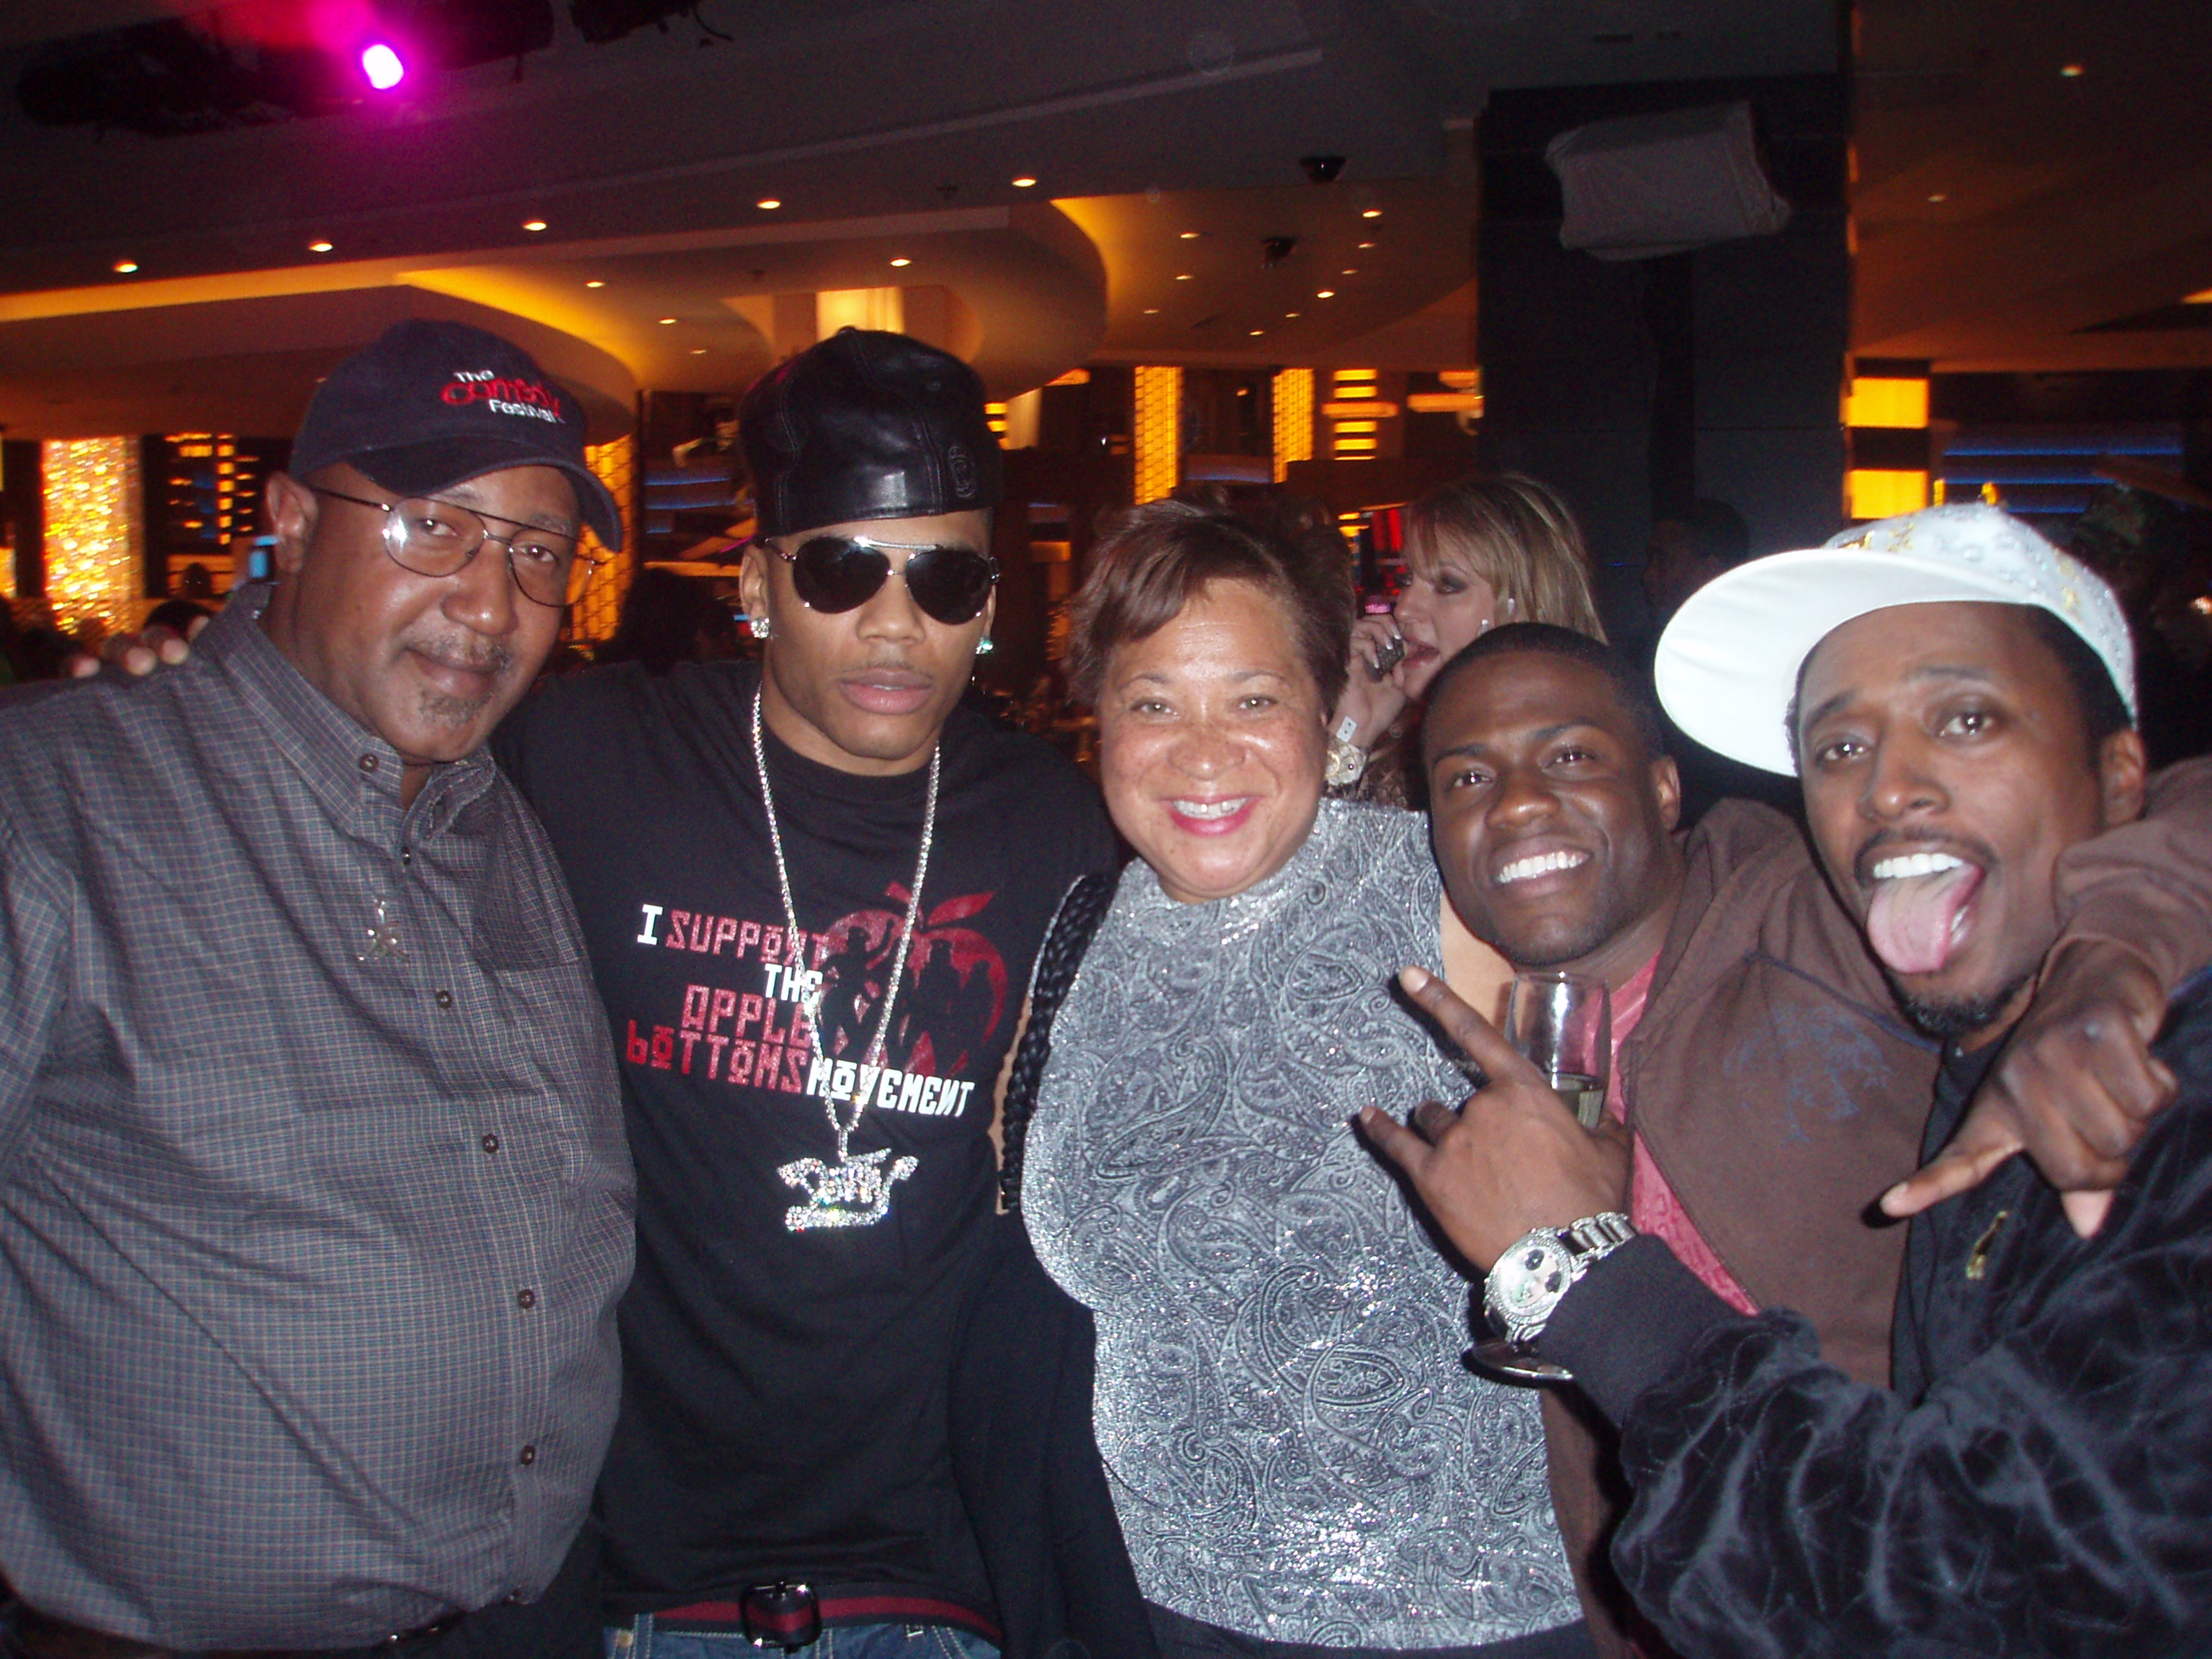 Laff House owner Rod Millwood with Nelly, wife Mona, Kevin Hart, and Eddie Griffith. (credit: Rod Millwood)